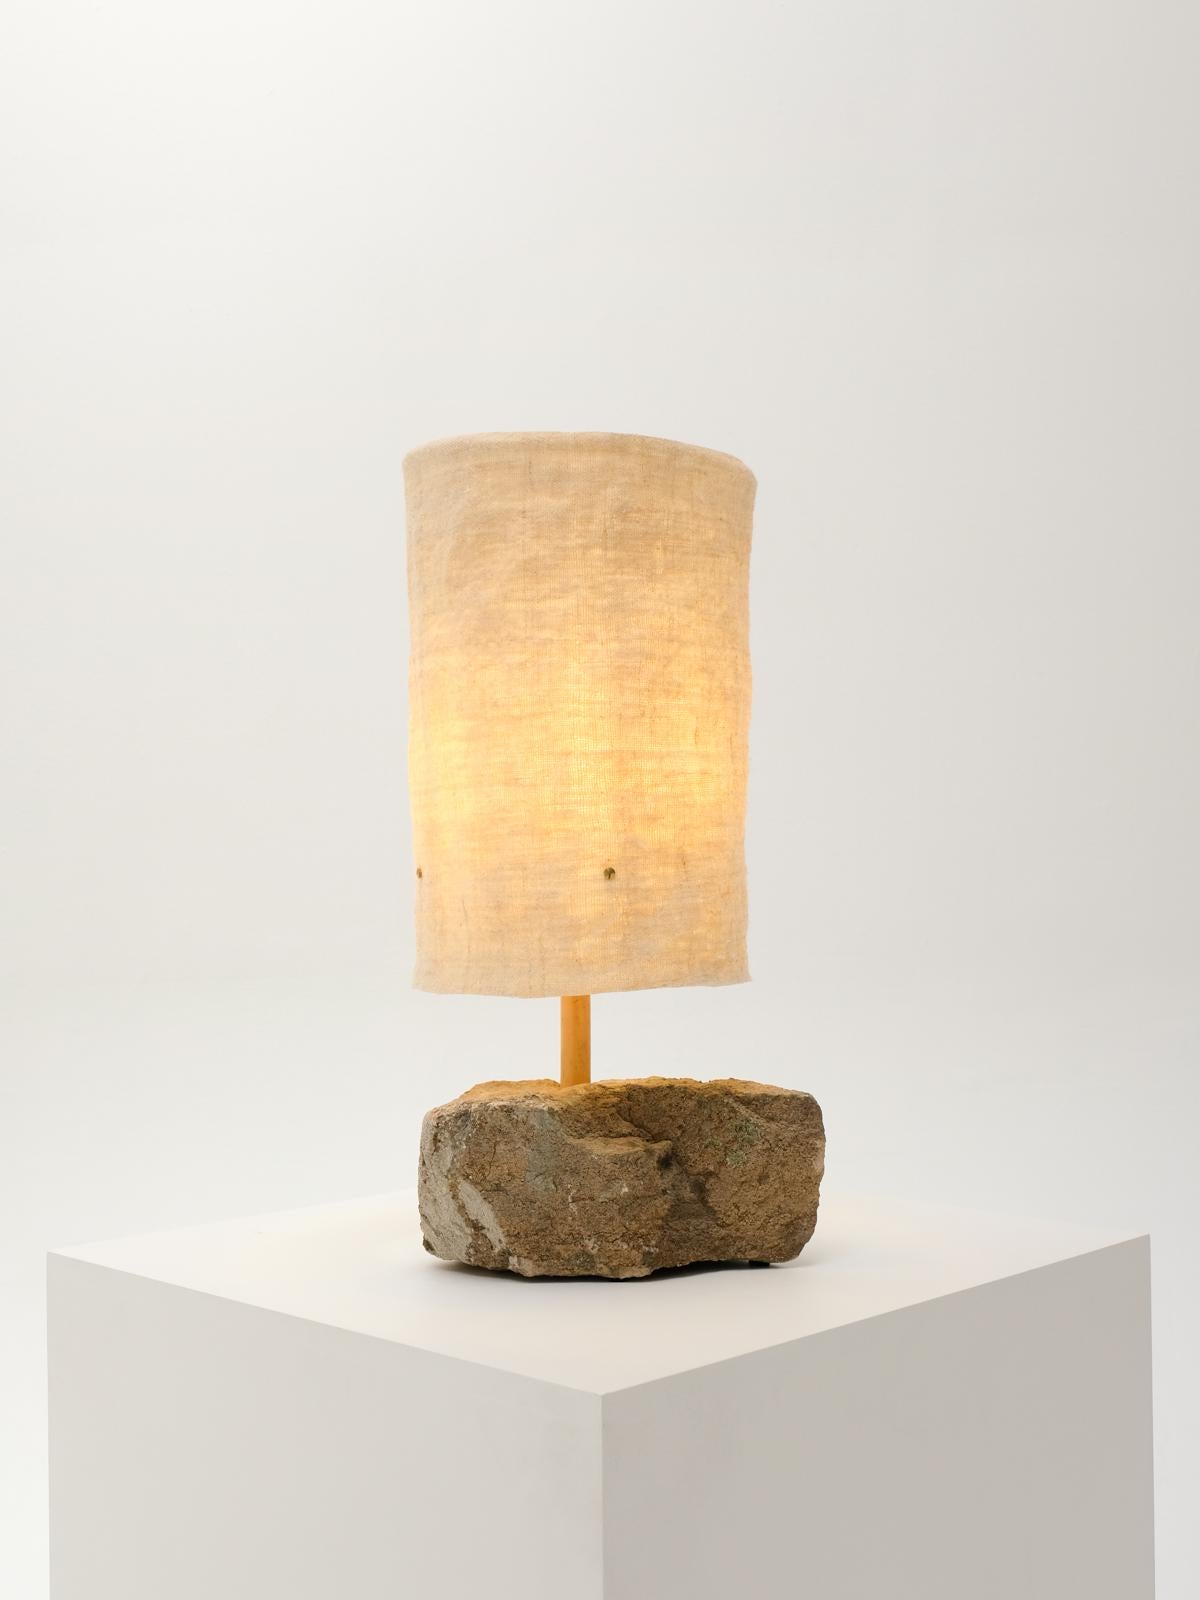 Hand-Woven Hjra Table Lamp Large, Handspun, Handwoven wool Lampshade, Made of Rock & Reed For Sale